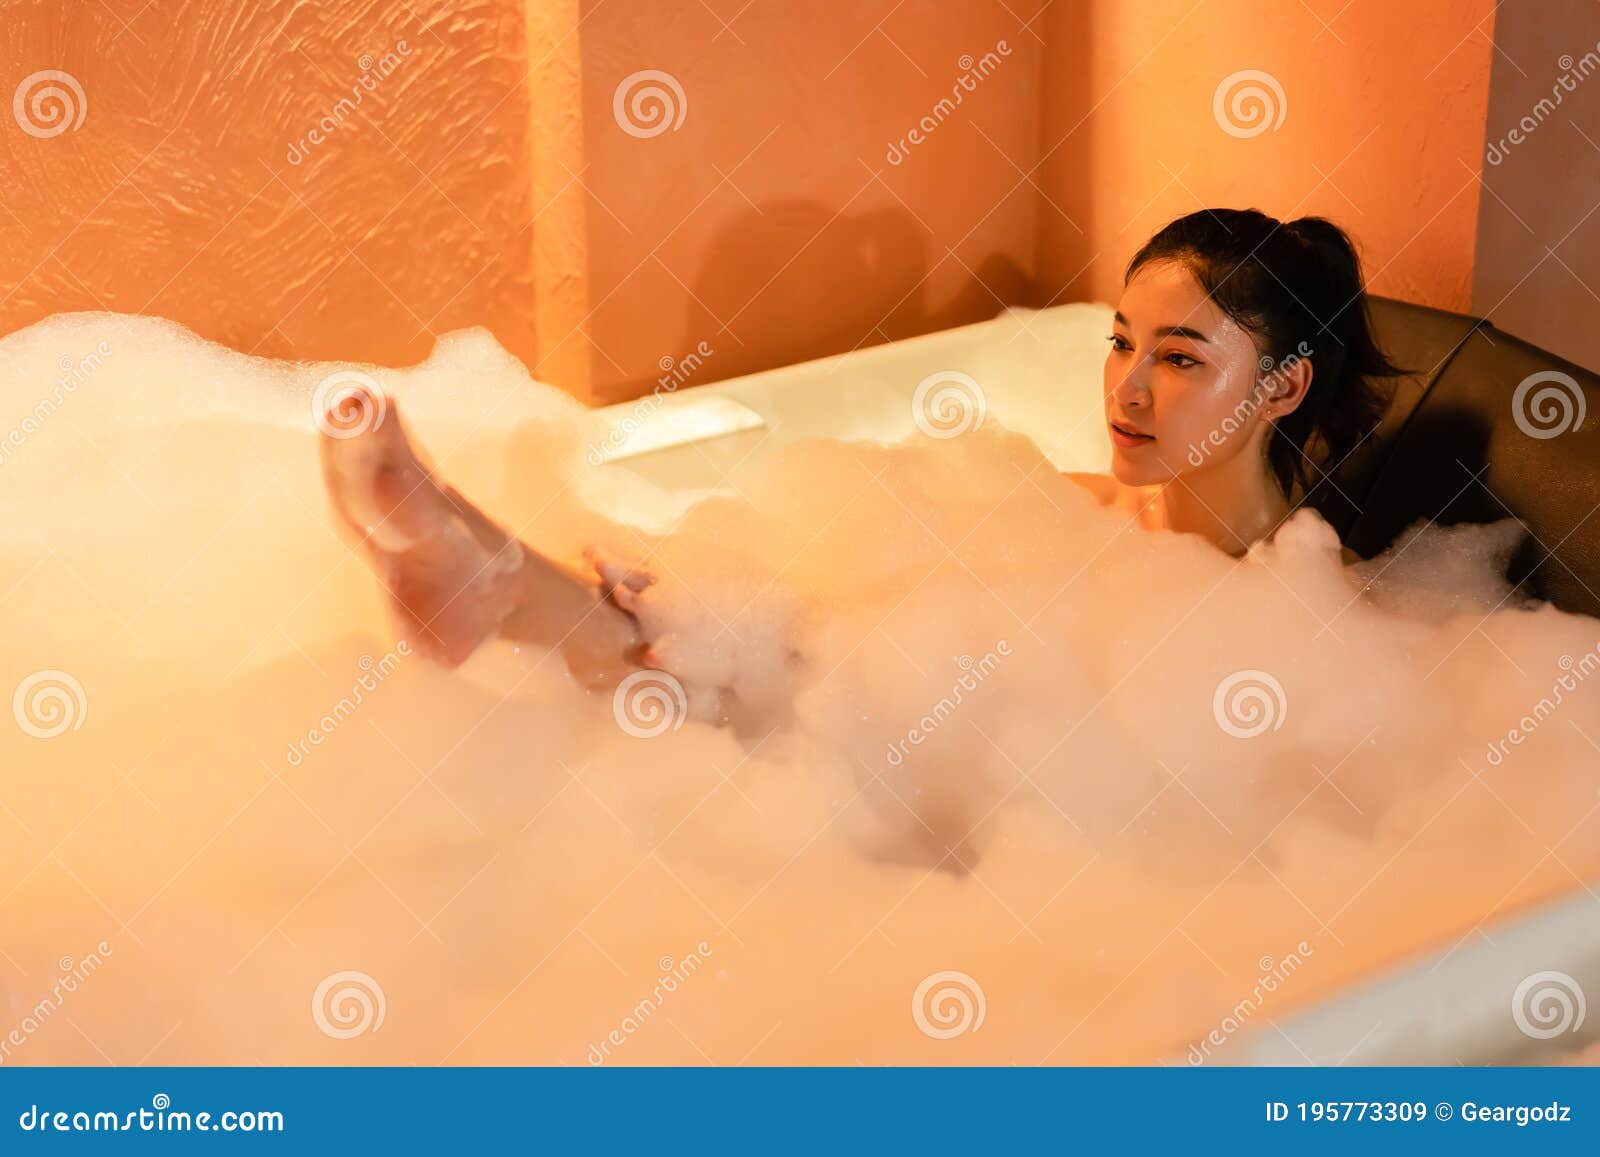 Woman Taking A Bubble Bath In Bathtub At The Night Stock Image Image Of Female Korean